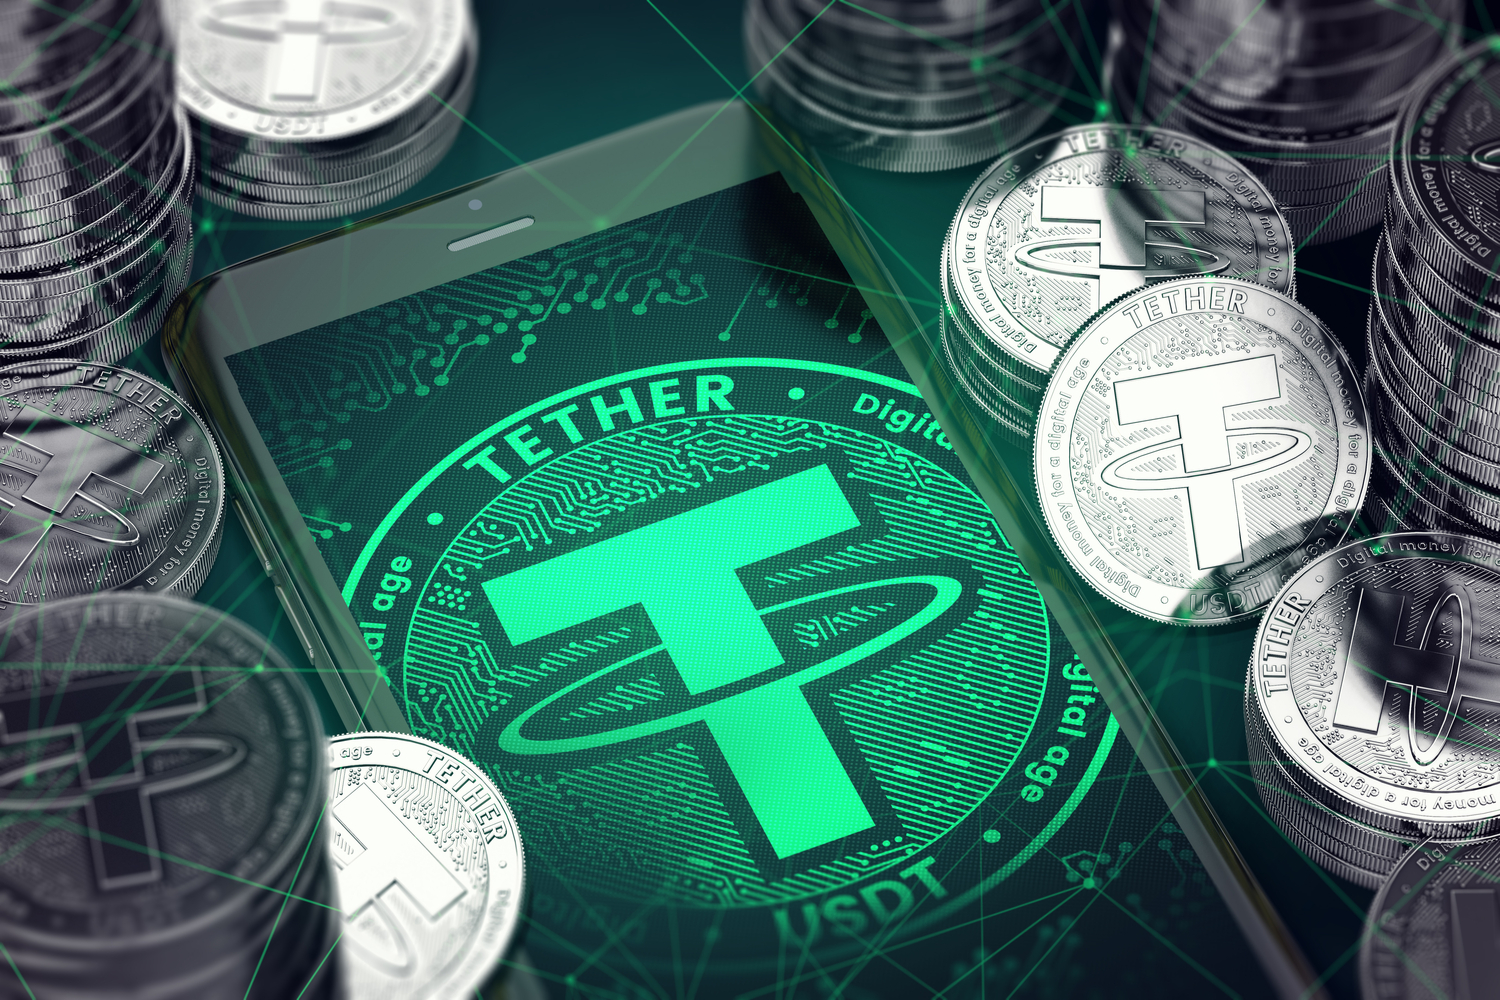 tether 1